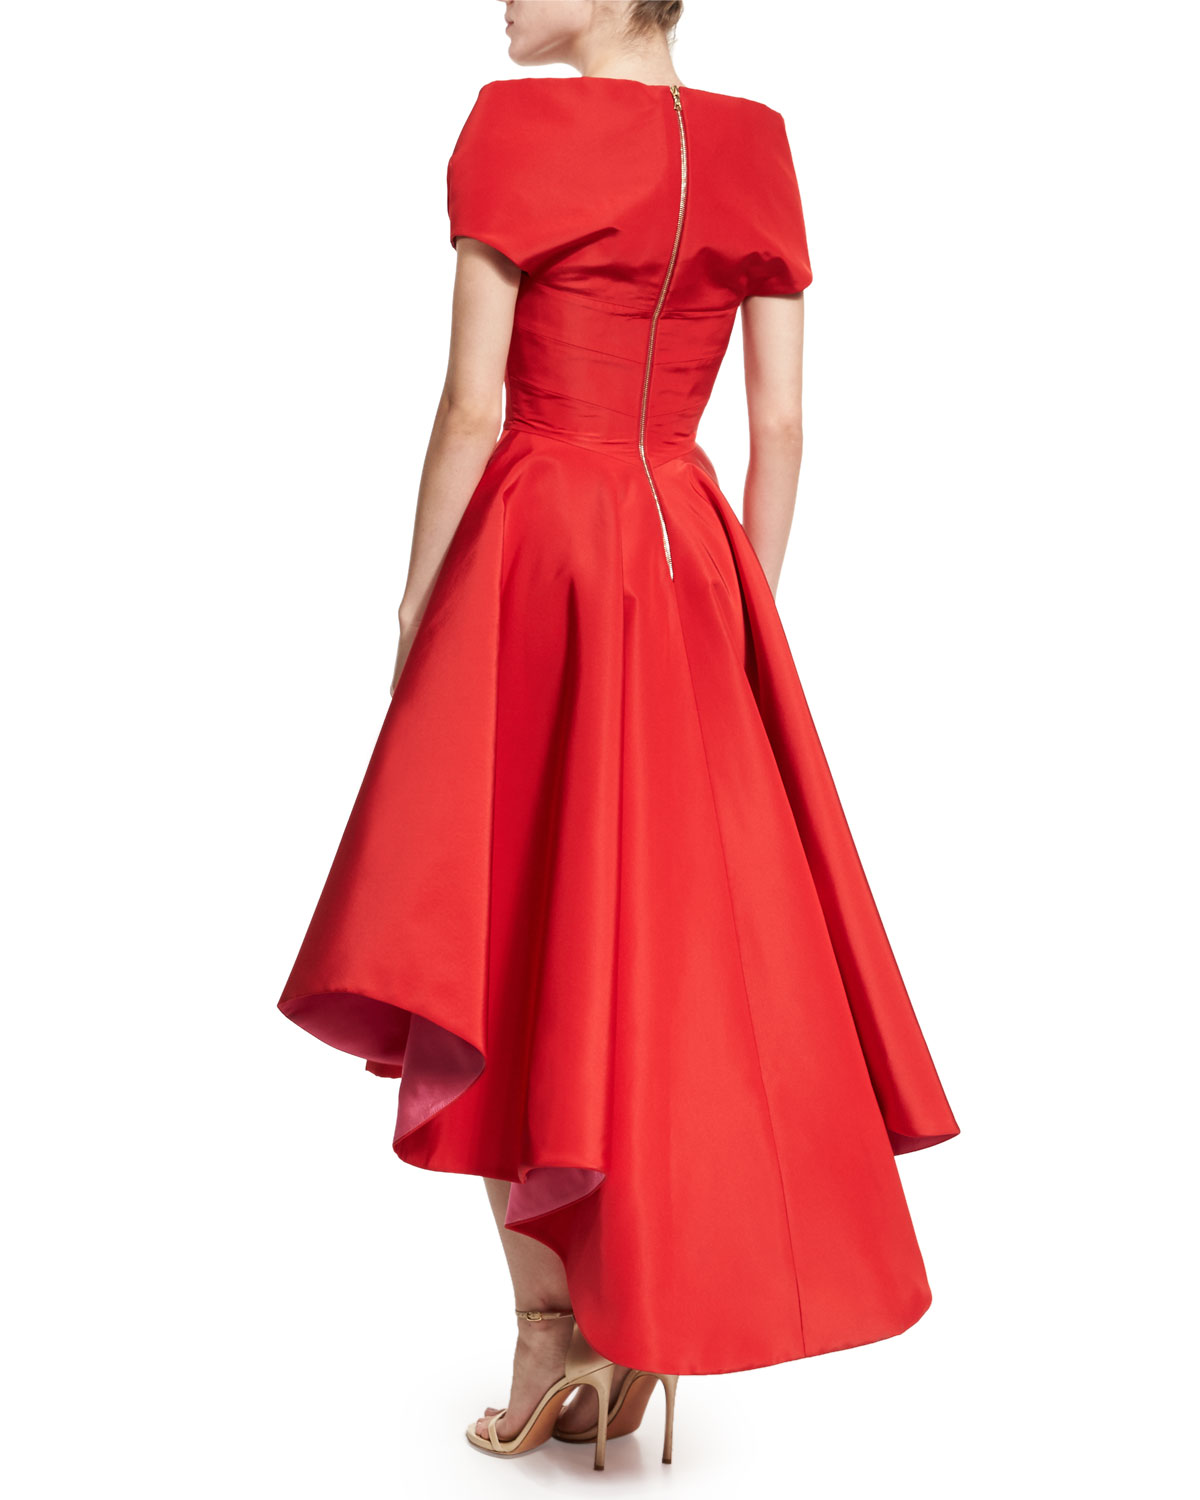 Tulip Two-Tone Dress, Red